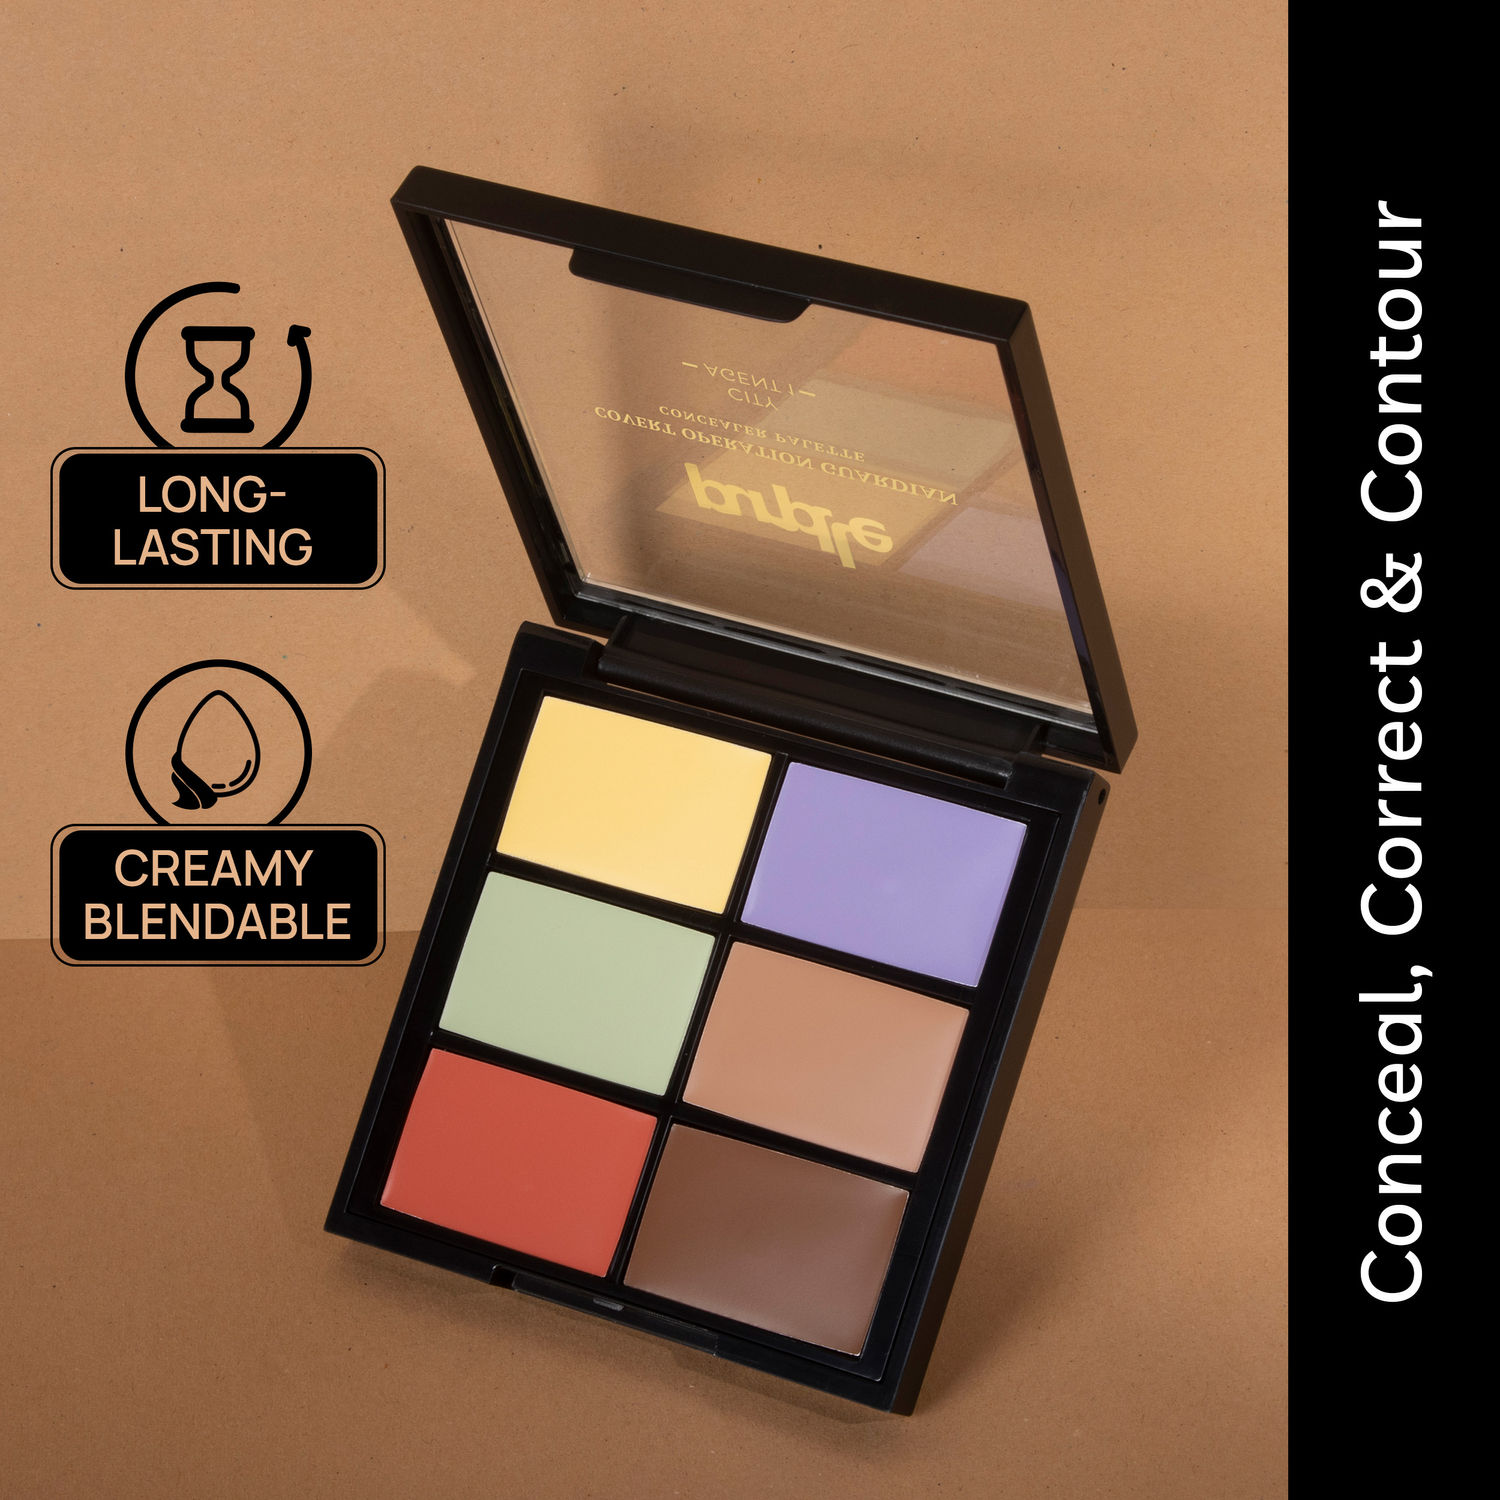 Purplle Concealer Palette Covert Operation Guardian | All Skin Types| Medium to buildable coverage | Cruelty Free| Conceal, Contour, Colour Corrector| Matte - City Agent 1 (12 g)